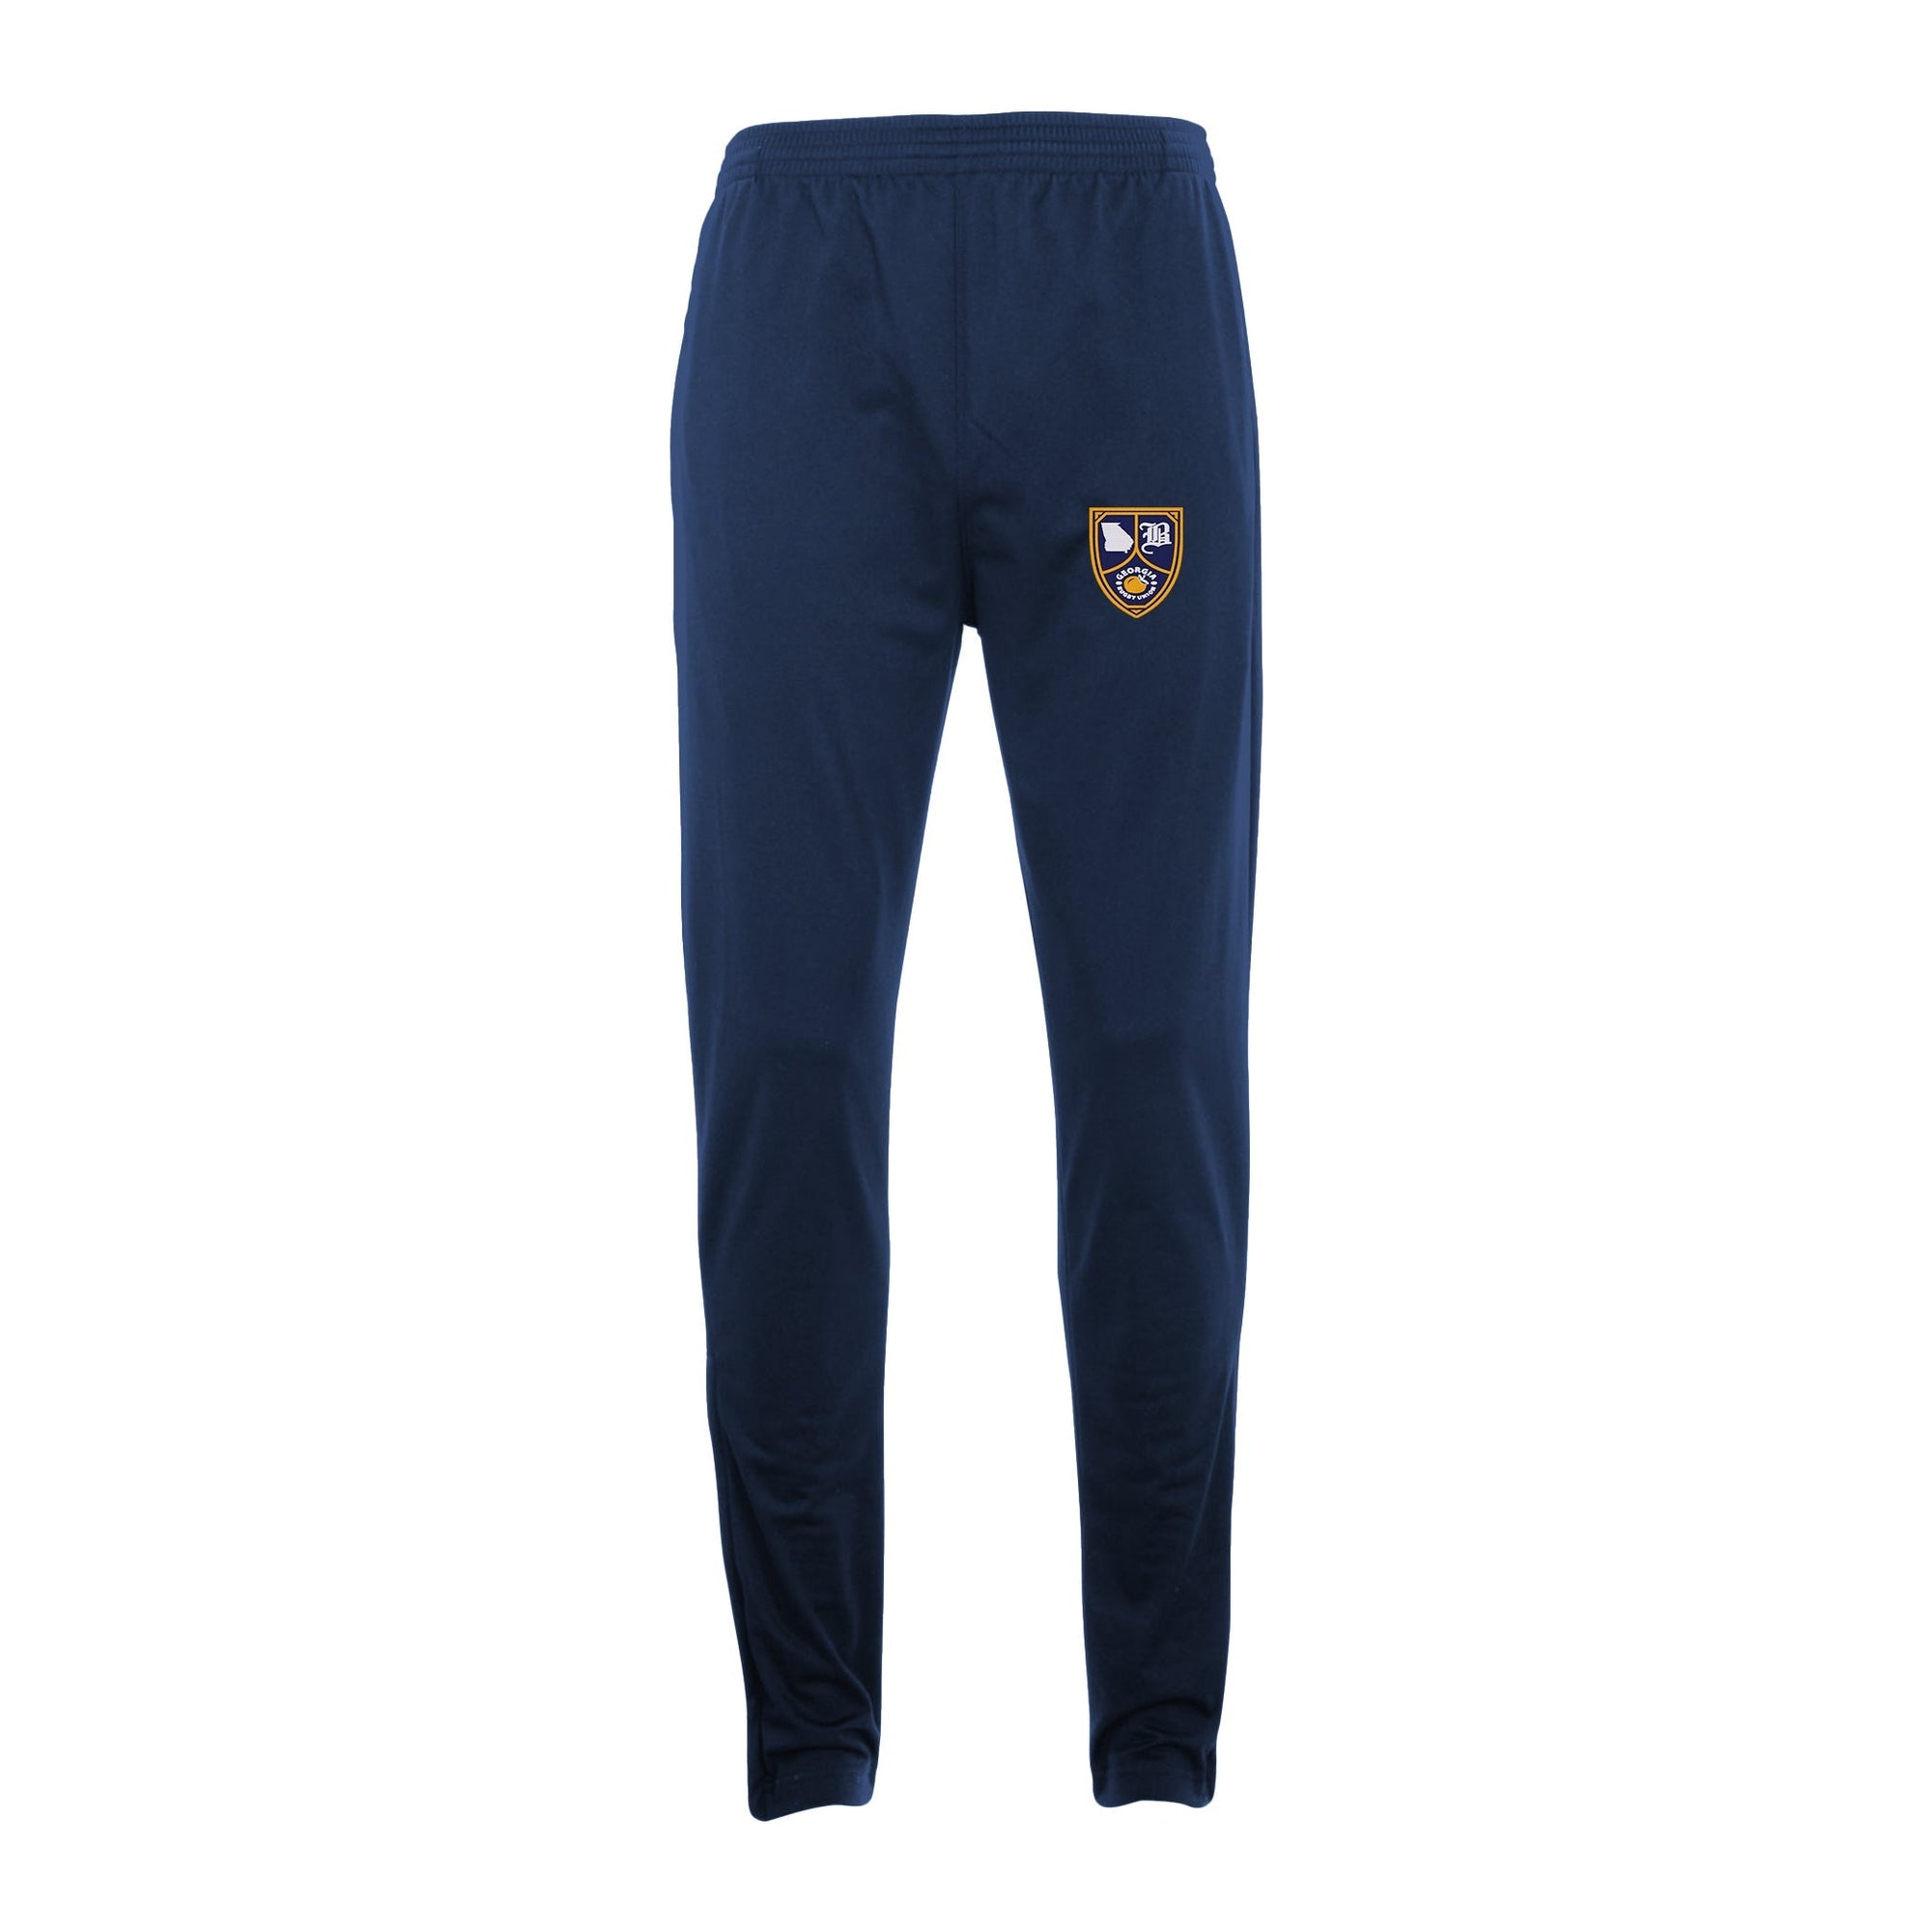 Rugby Imports GRU Unisex Tapered Leg Pant